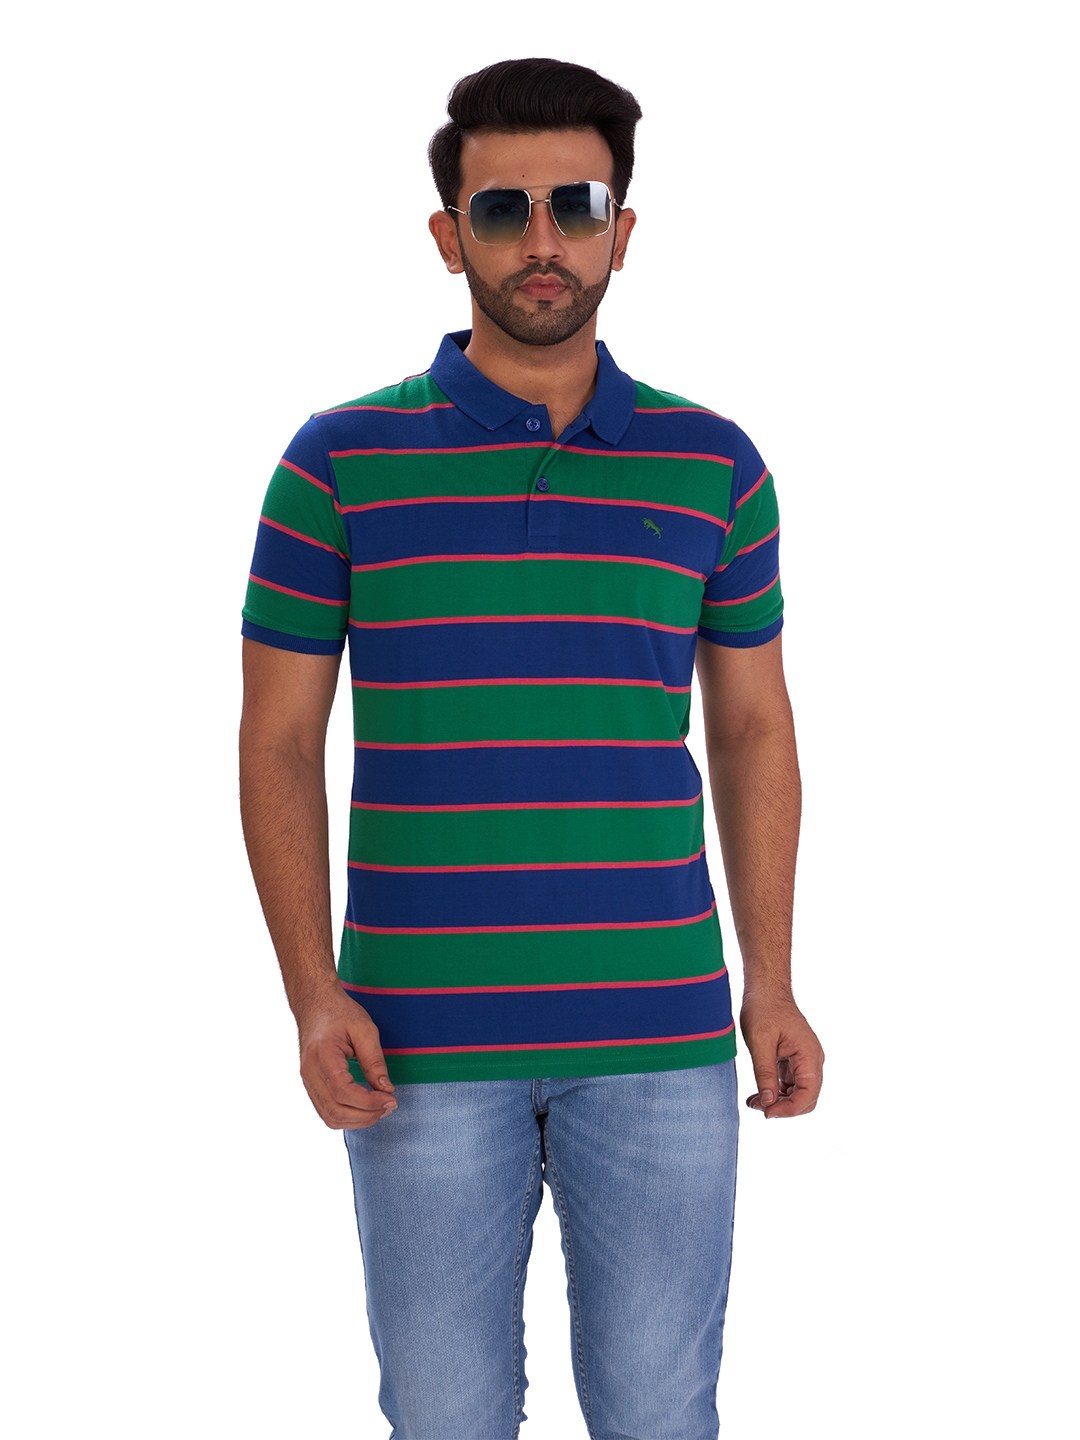 D'cot by Donear | D'cot by Donear Mens Multi Polycotton T-Shirts